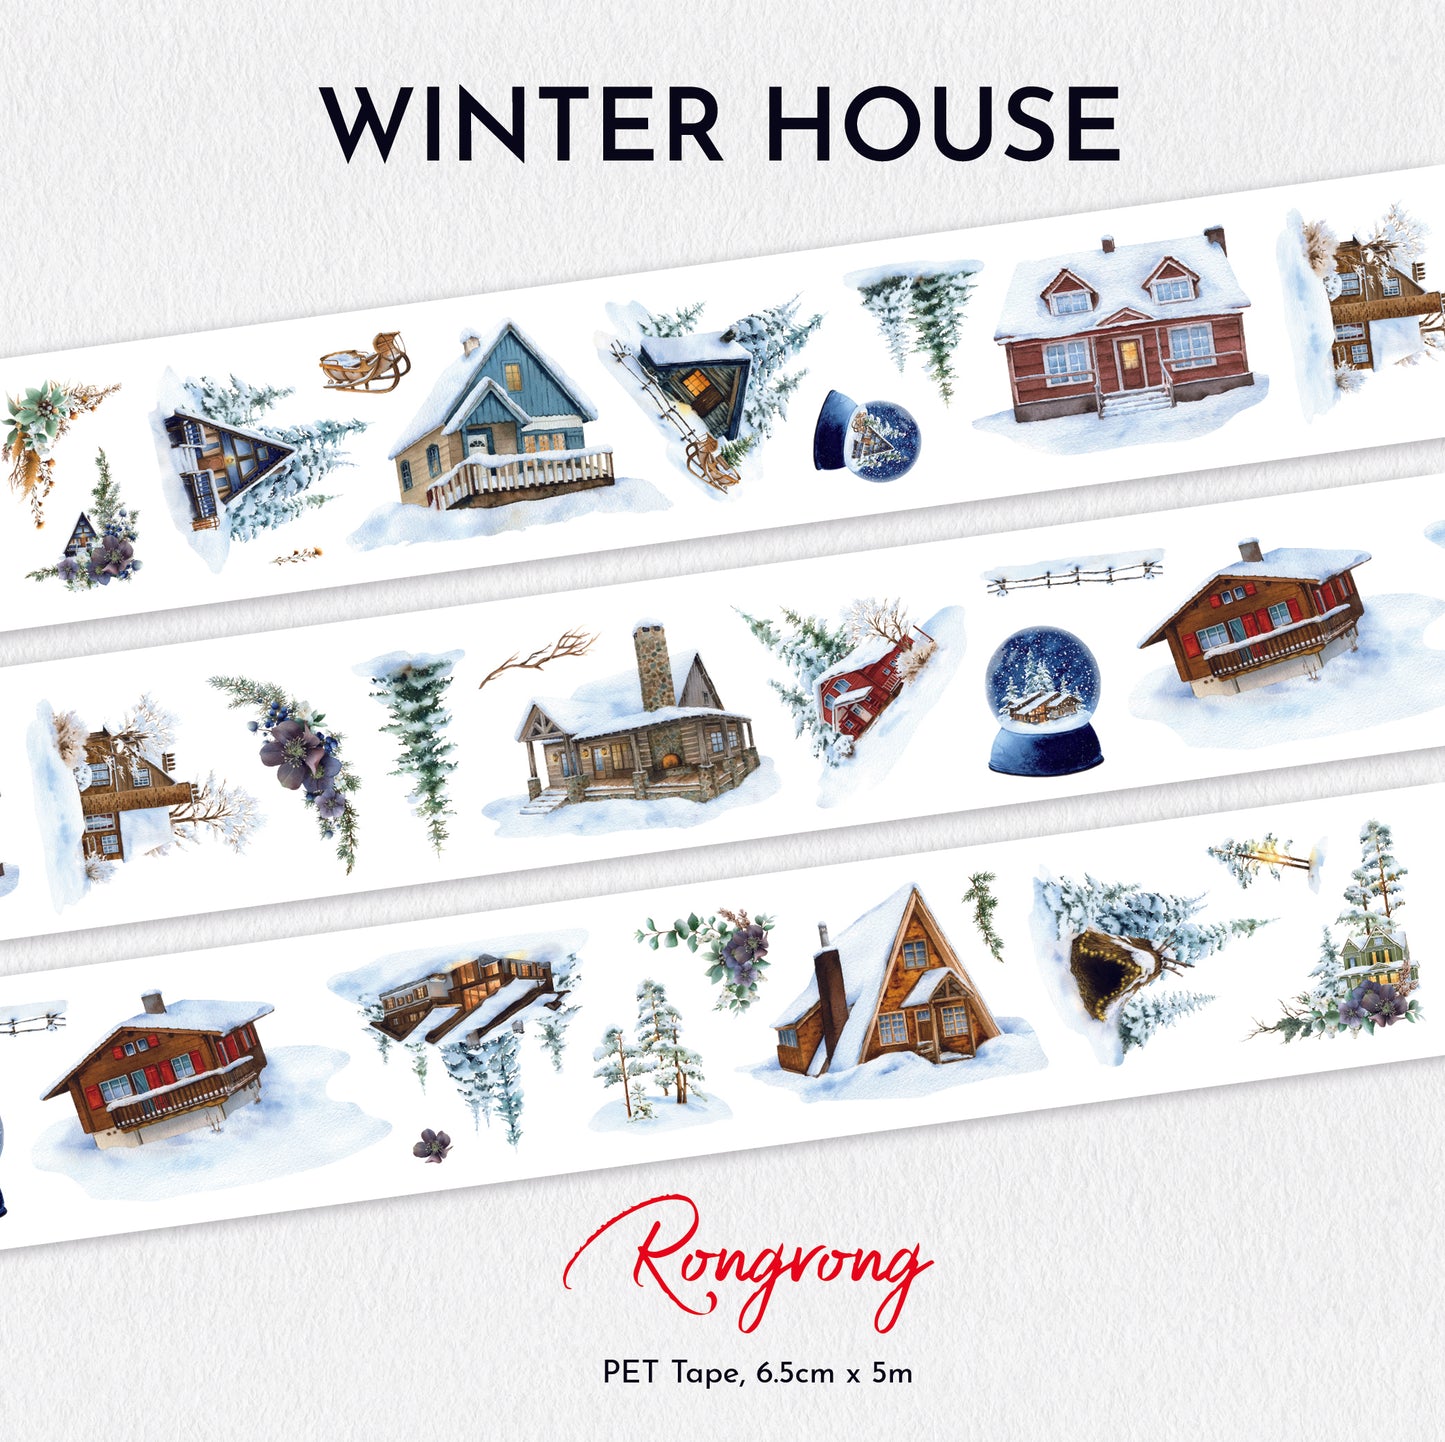 Winter House PET Tape (updated version 2.0) (Set of 6)